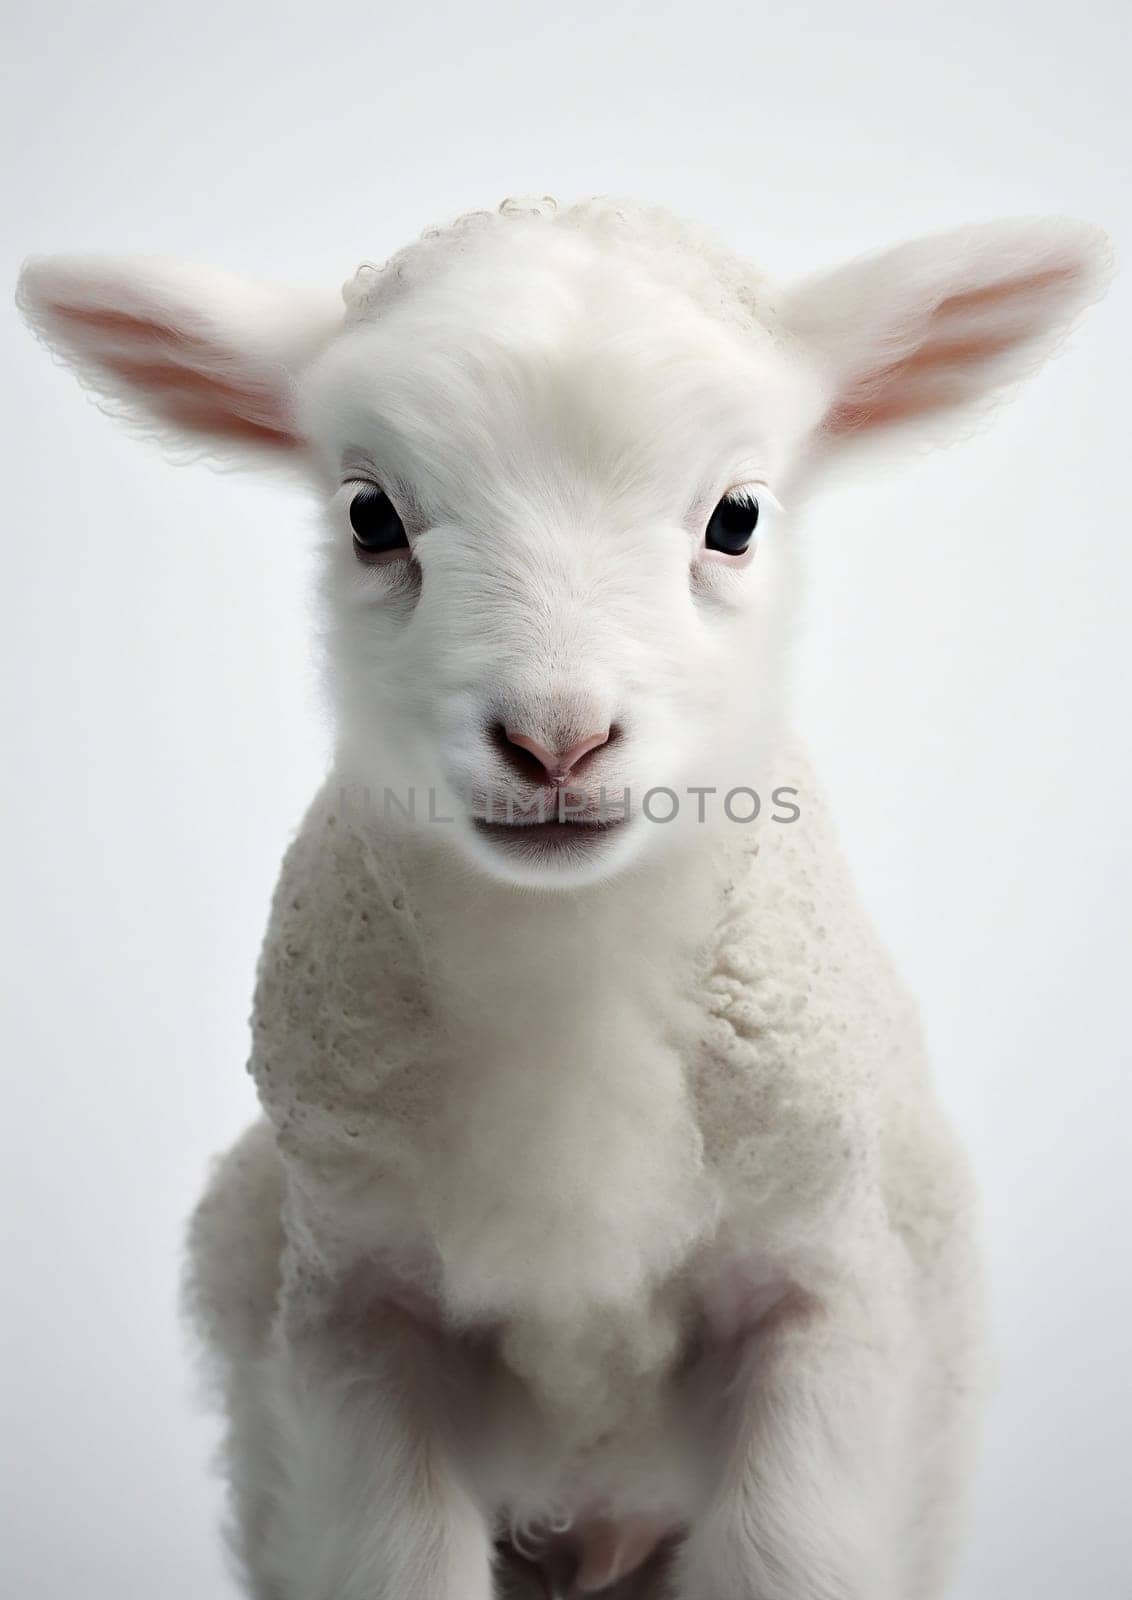 Lamb nature white spring agriculture grass animal young rural baby livestock meadow field cute head wool mammal sheep green domestic small little farming